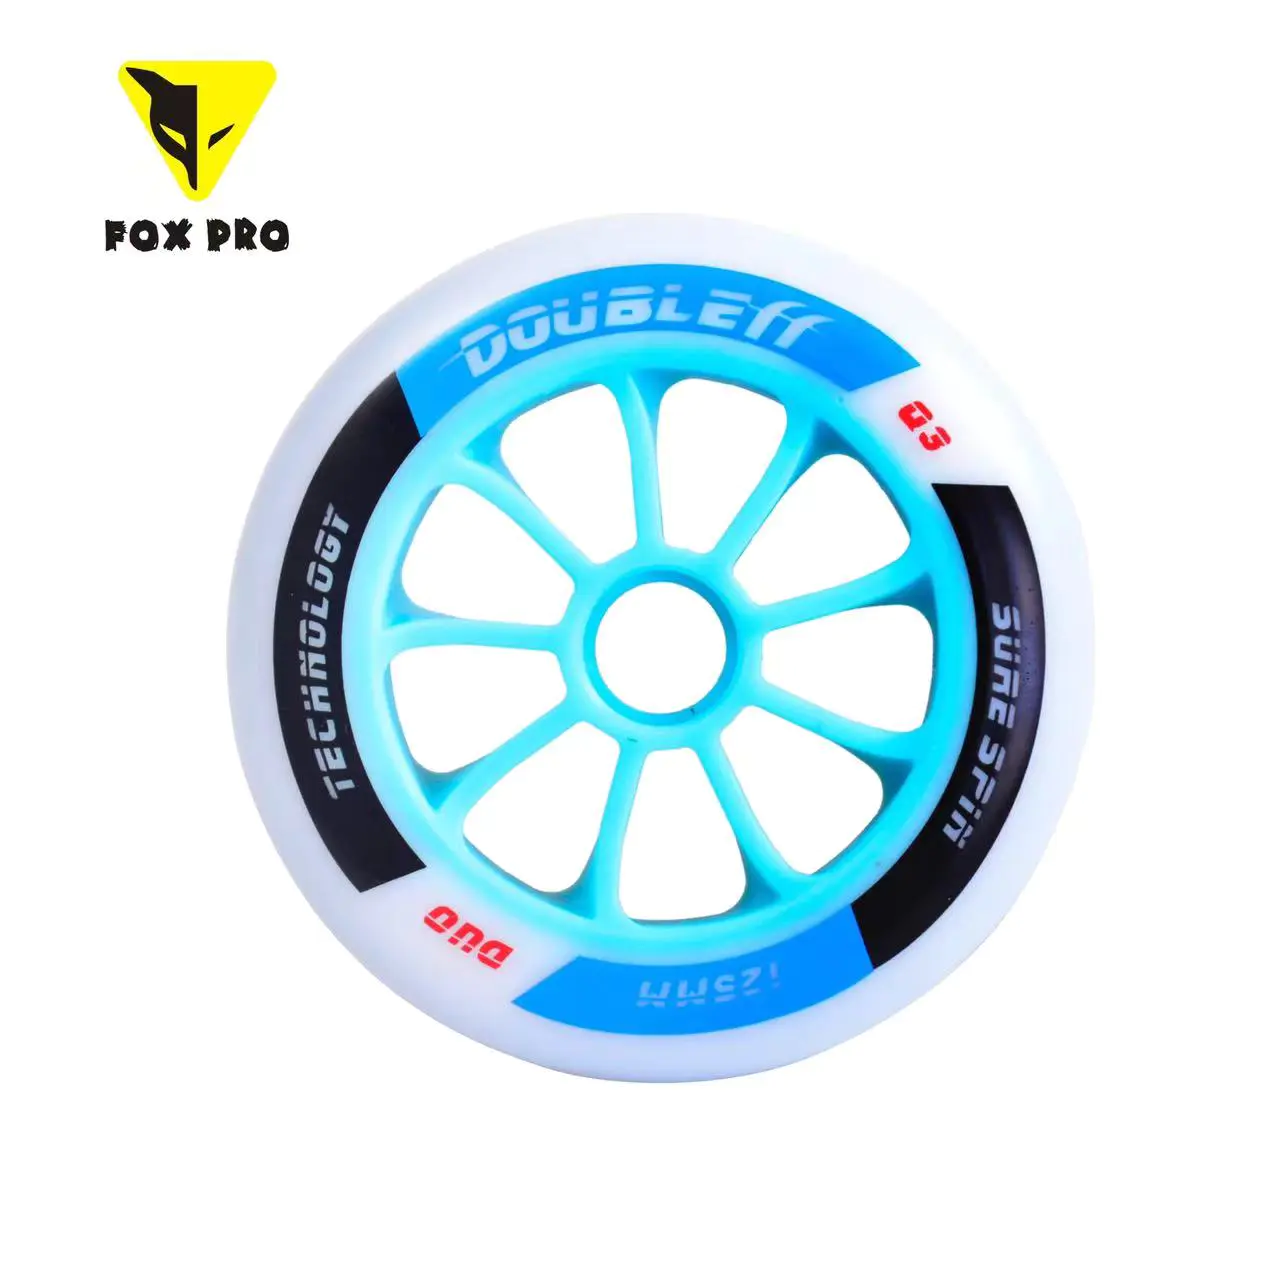 Double FF Professional Speed Skate Wheels 90mm/100mm/110mm/125mm Double Layer Double Hardness High Resilience Speed Skate Wheels